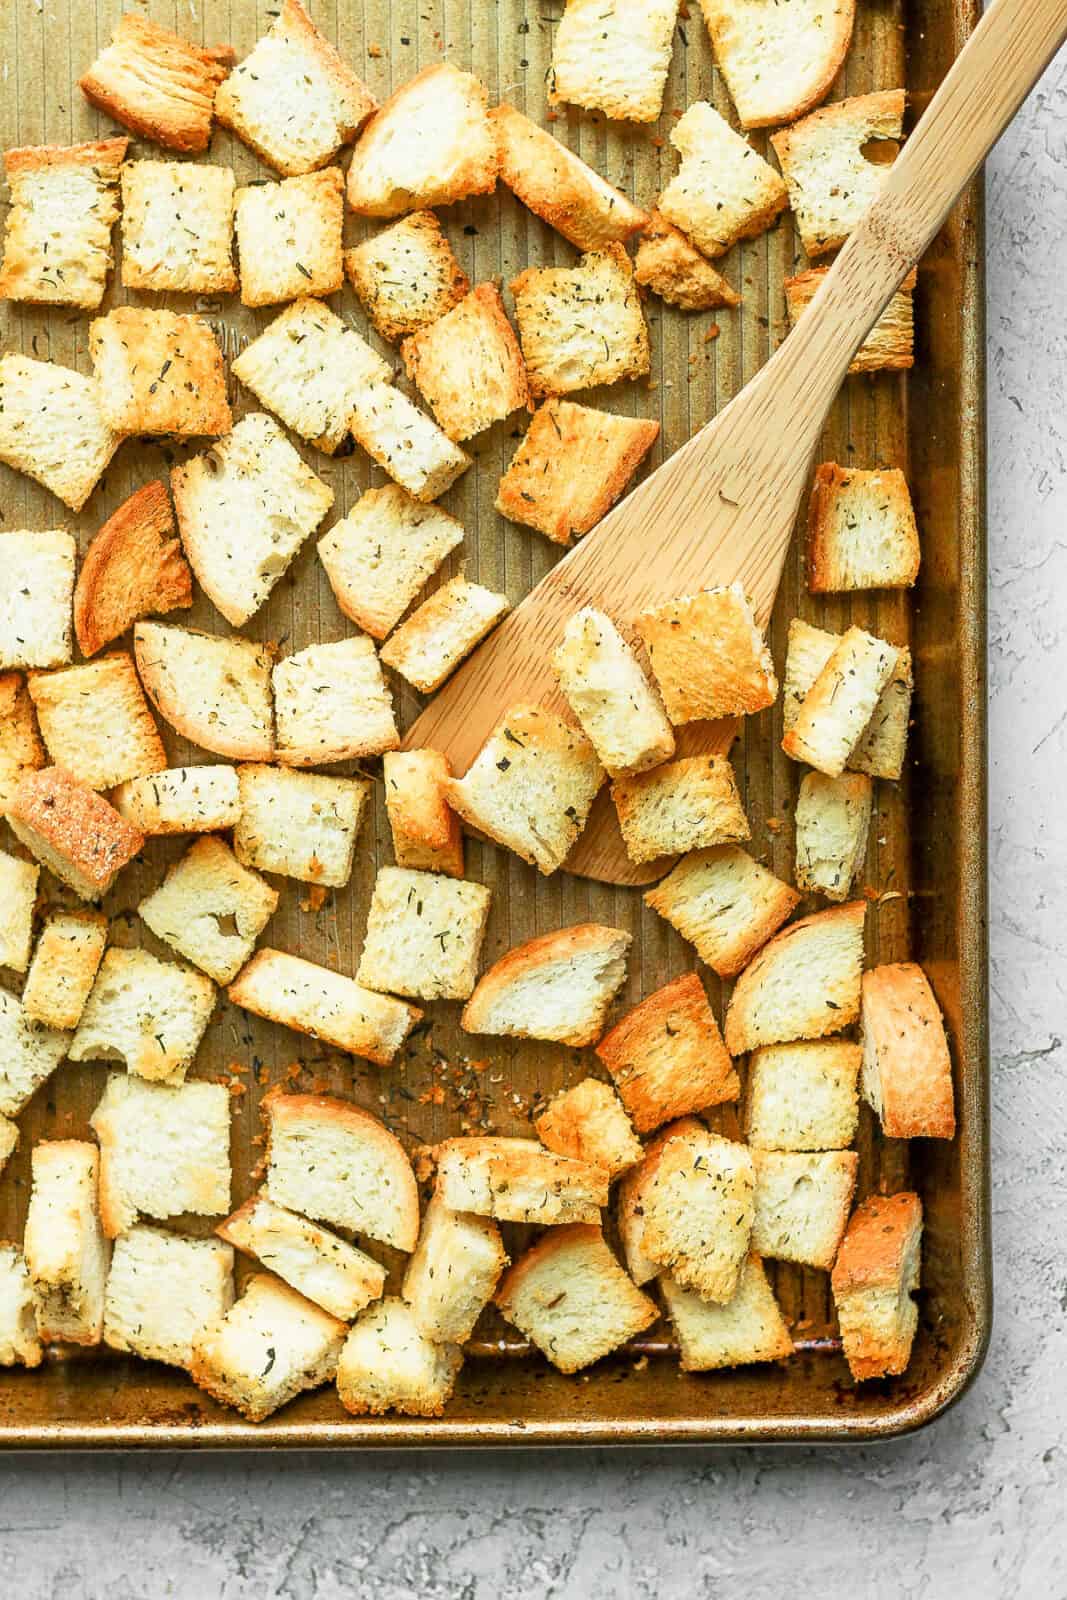 Croutons being scooped up by a wooden spatula.